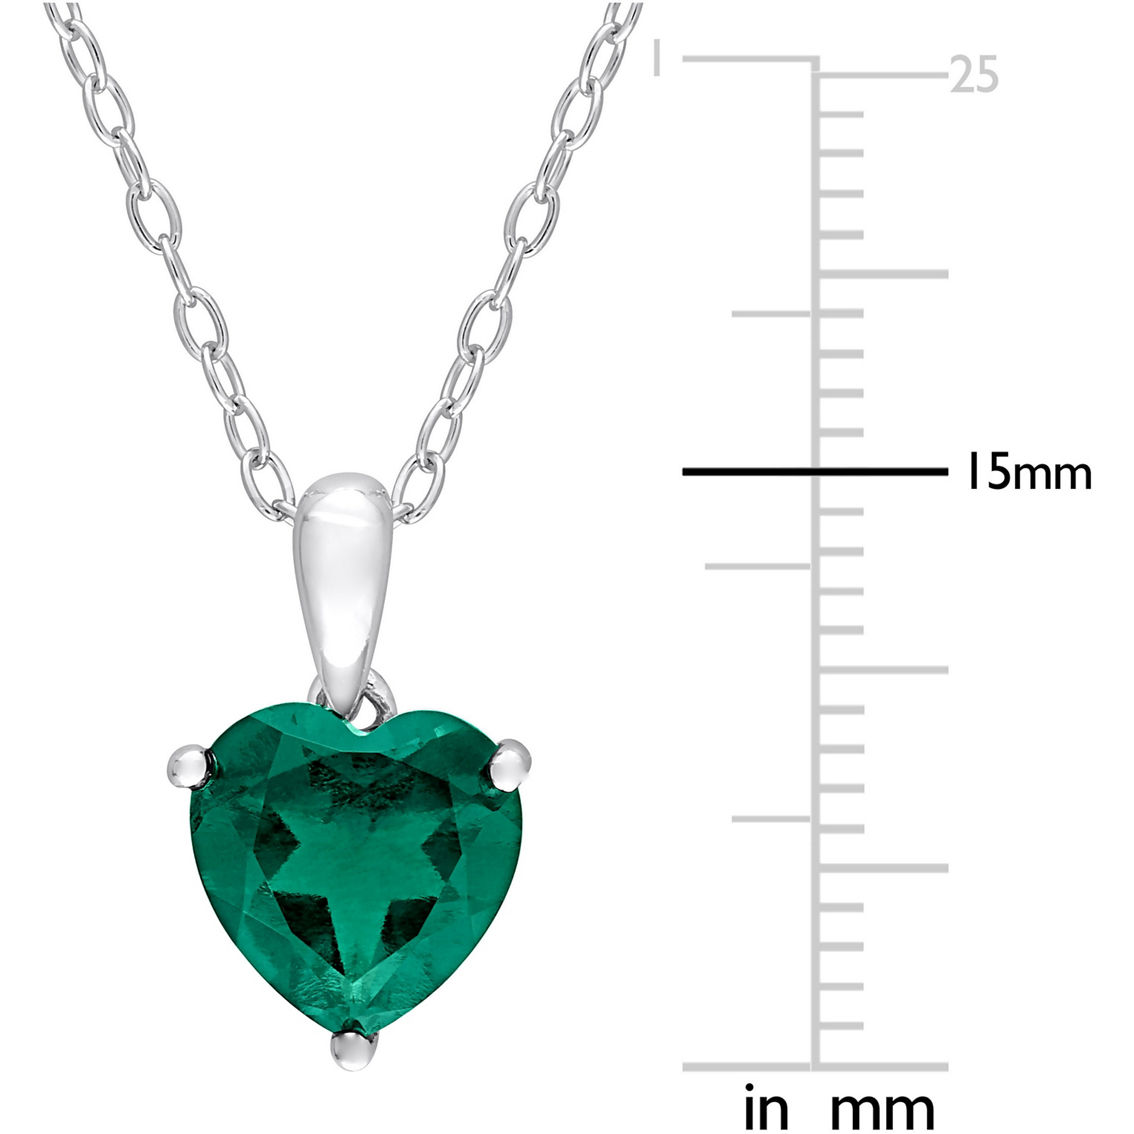 Sofia B. Sterling Silver Heart Created Emerald Solitaire Necklace and Earrings Set - Image 4 of 4